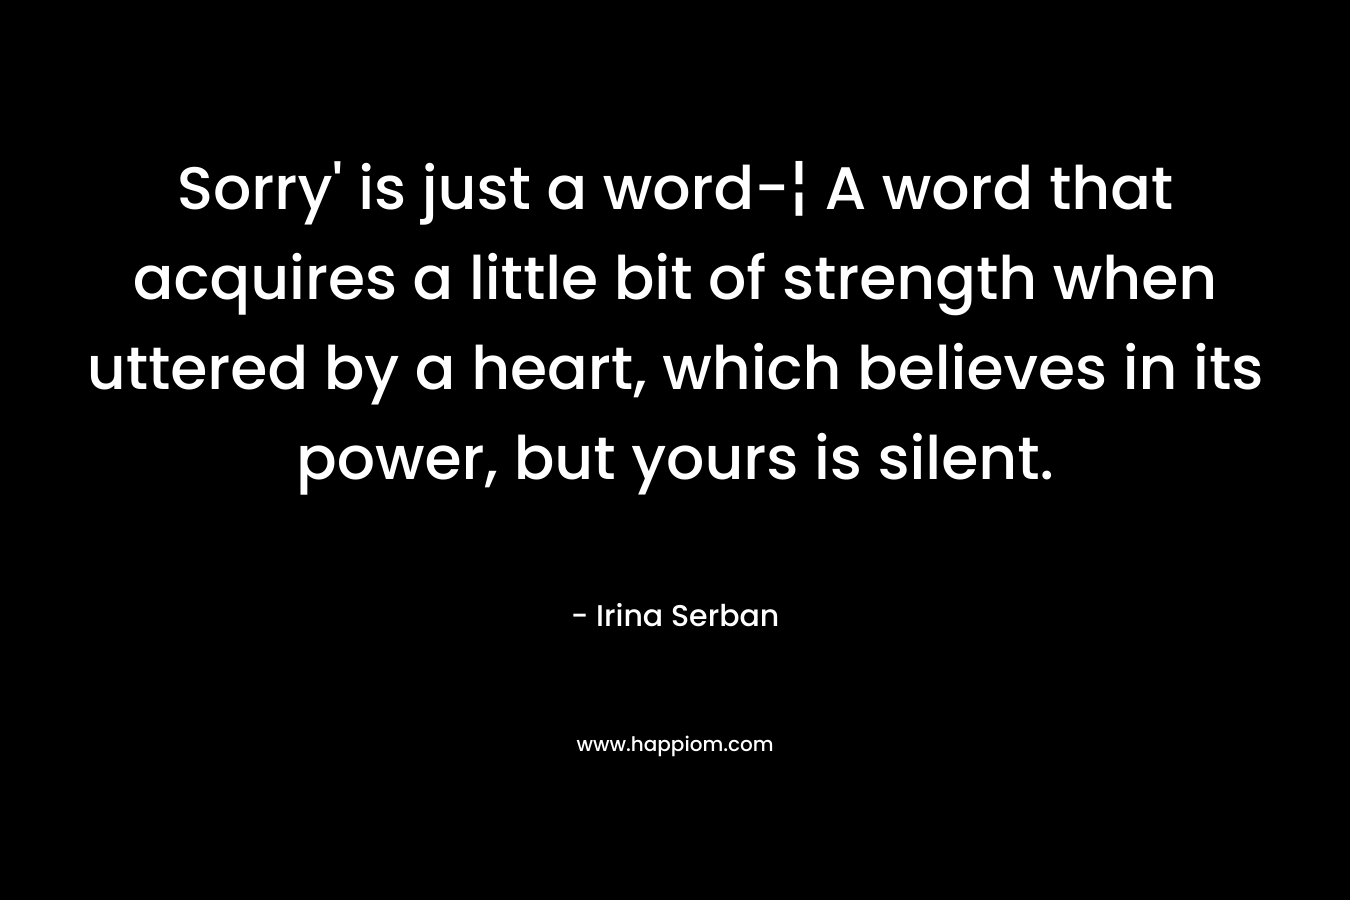 Sorry’ is just a word-¦ A word that acquires a little bit of strength when uttered by a heart, which believes in its power, but yours is silent. – Irina Serban